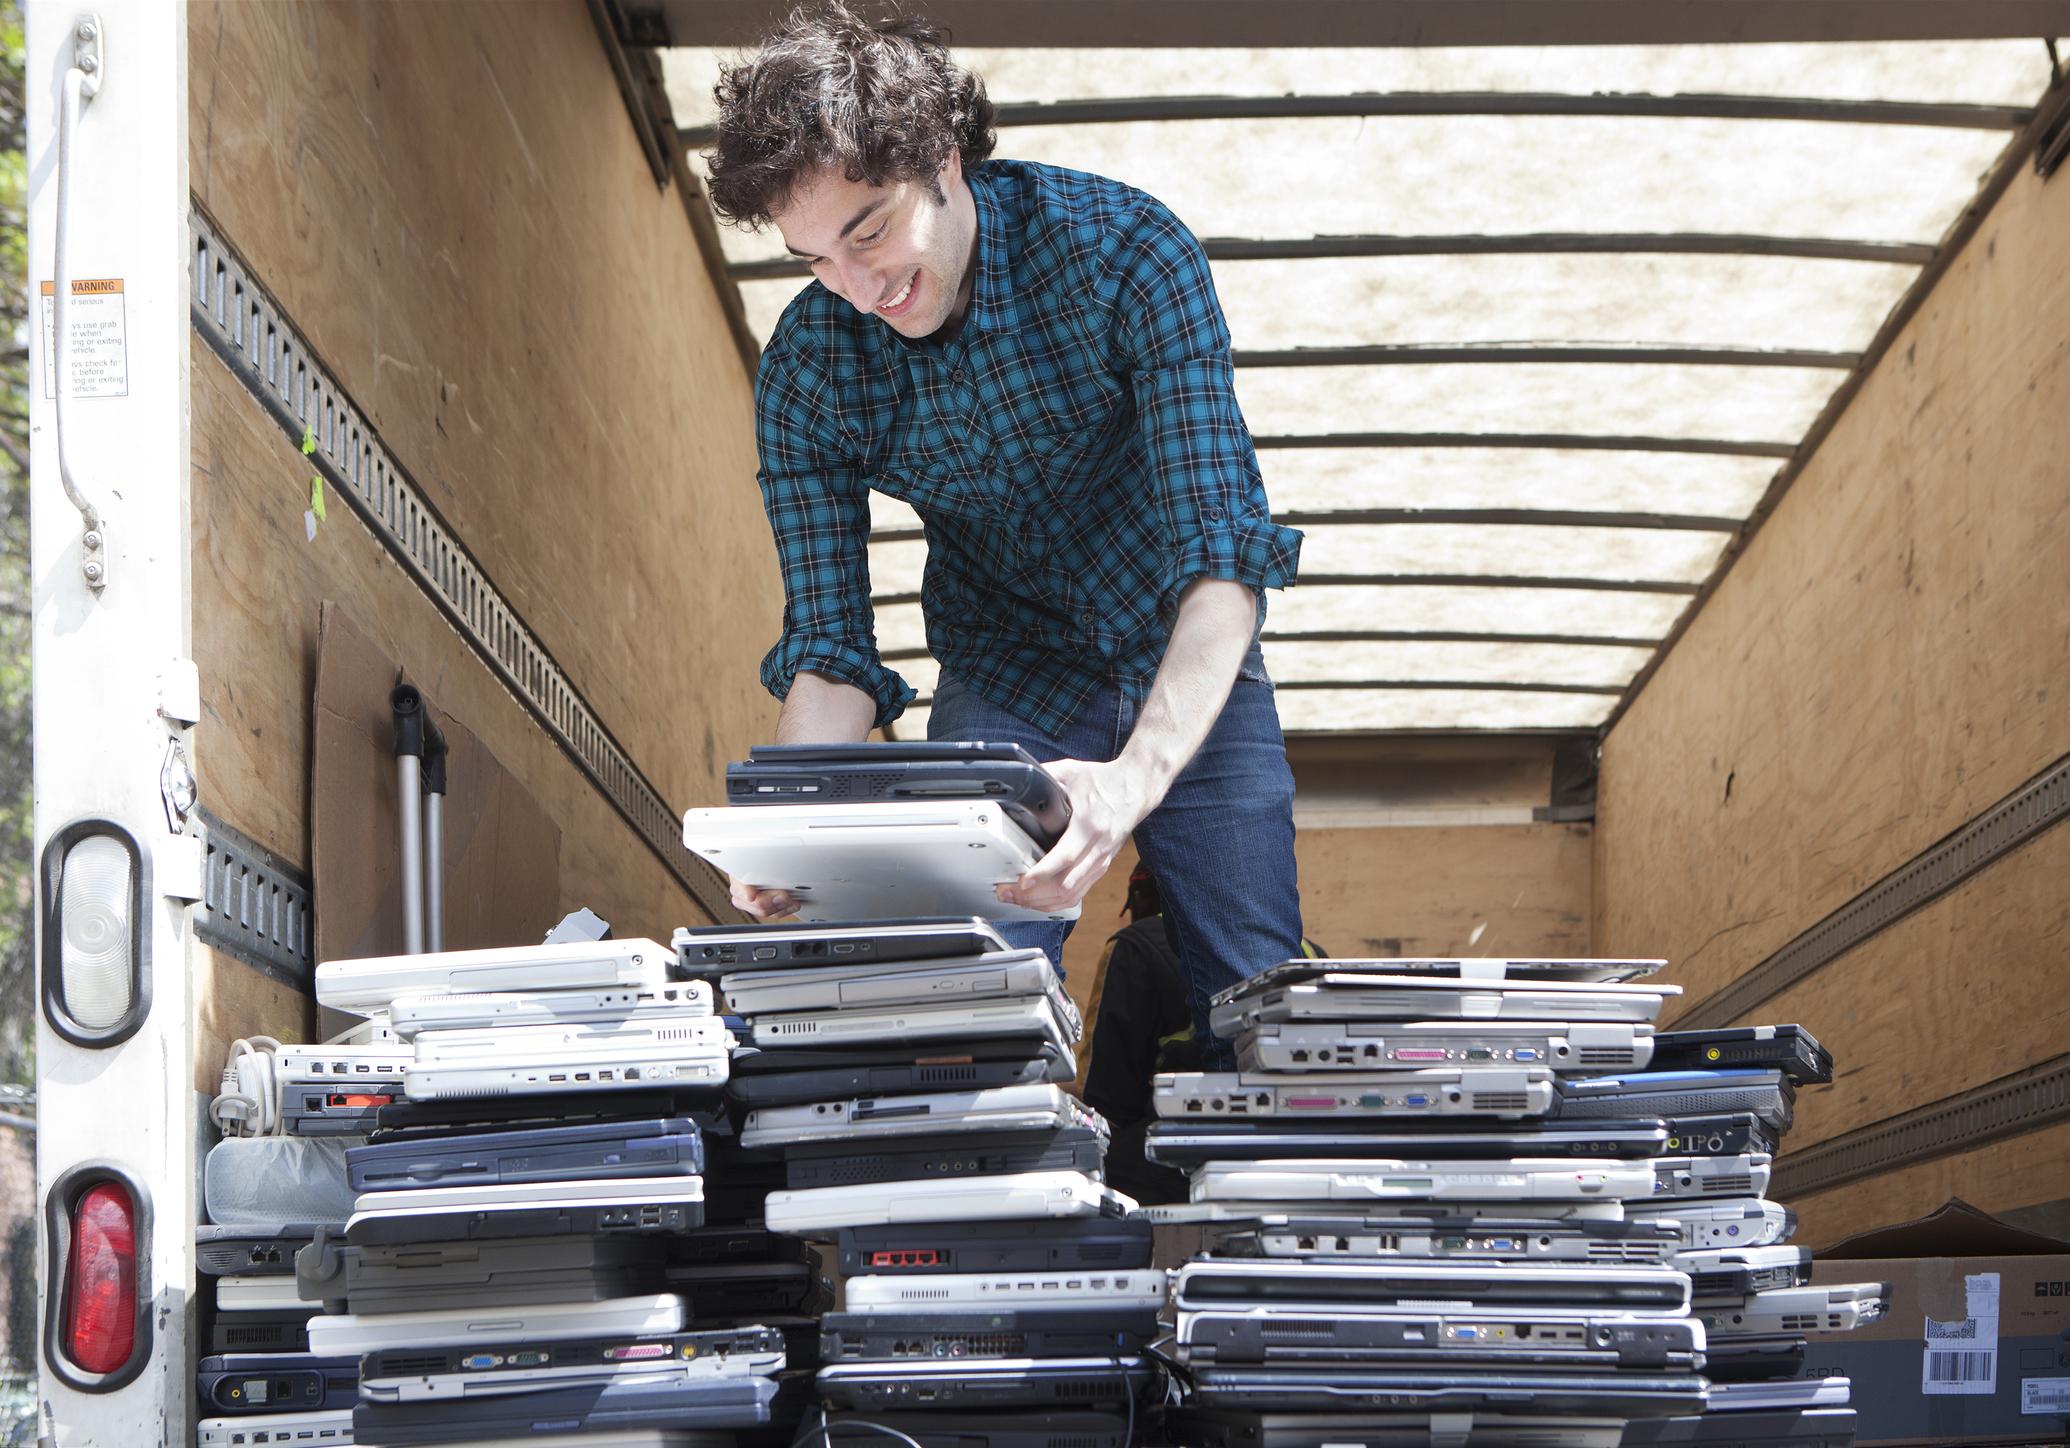  A man loading a pile of used laptops into the back of a van 